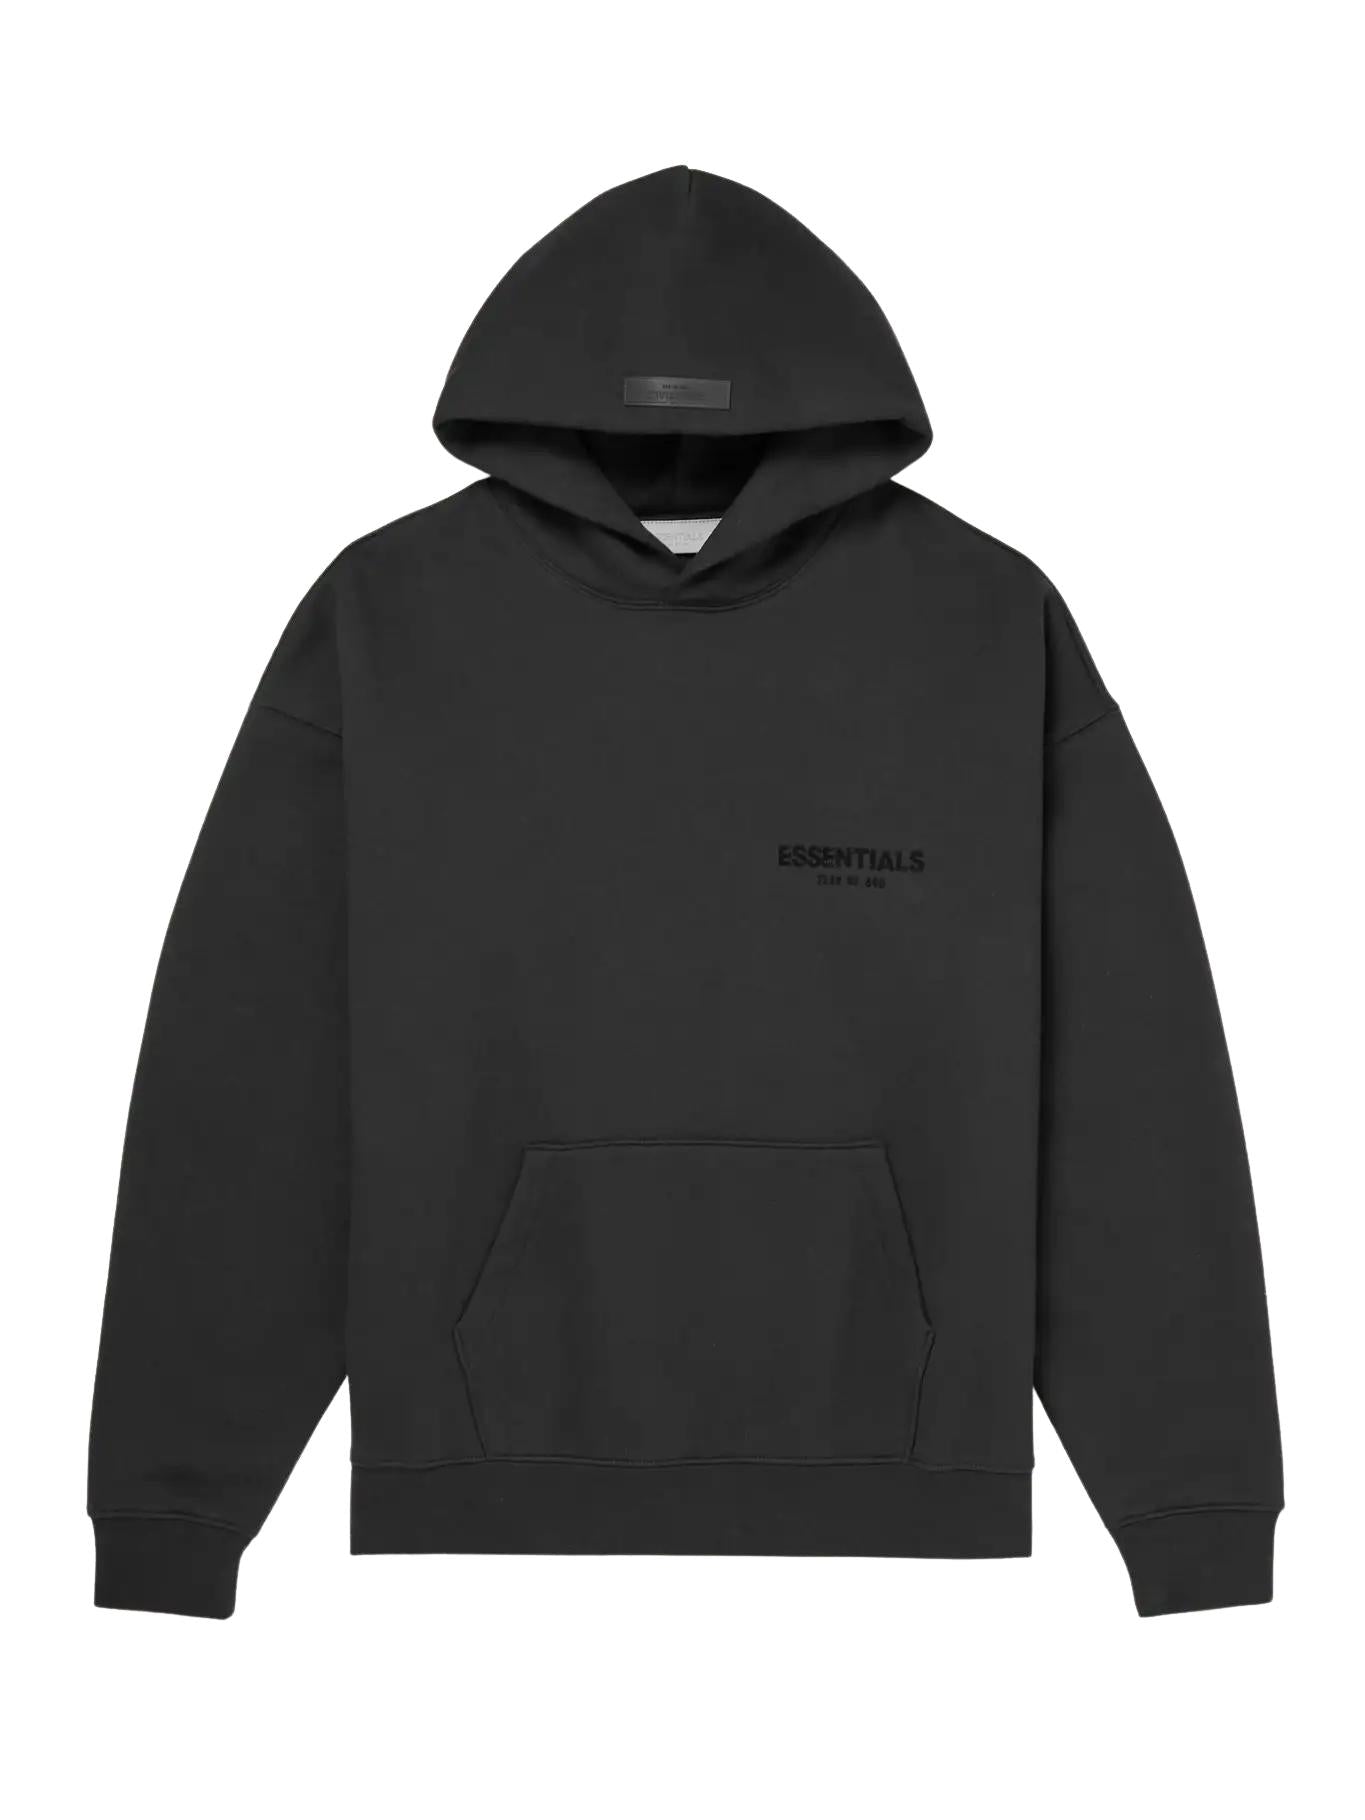 Fear of God ESSENTIALS Black / Stretch Limo Hoodie (SS22) Hype